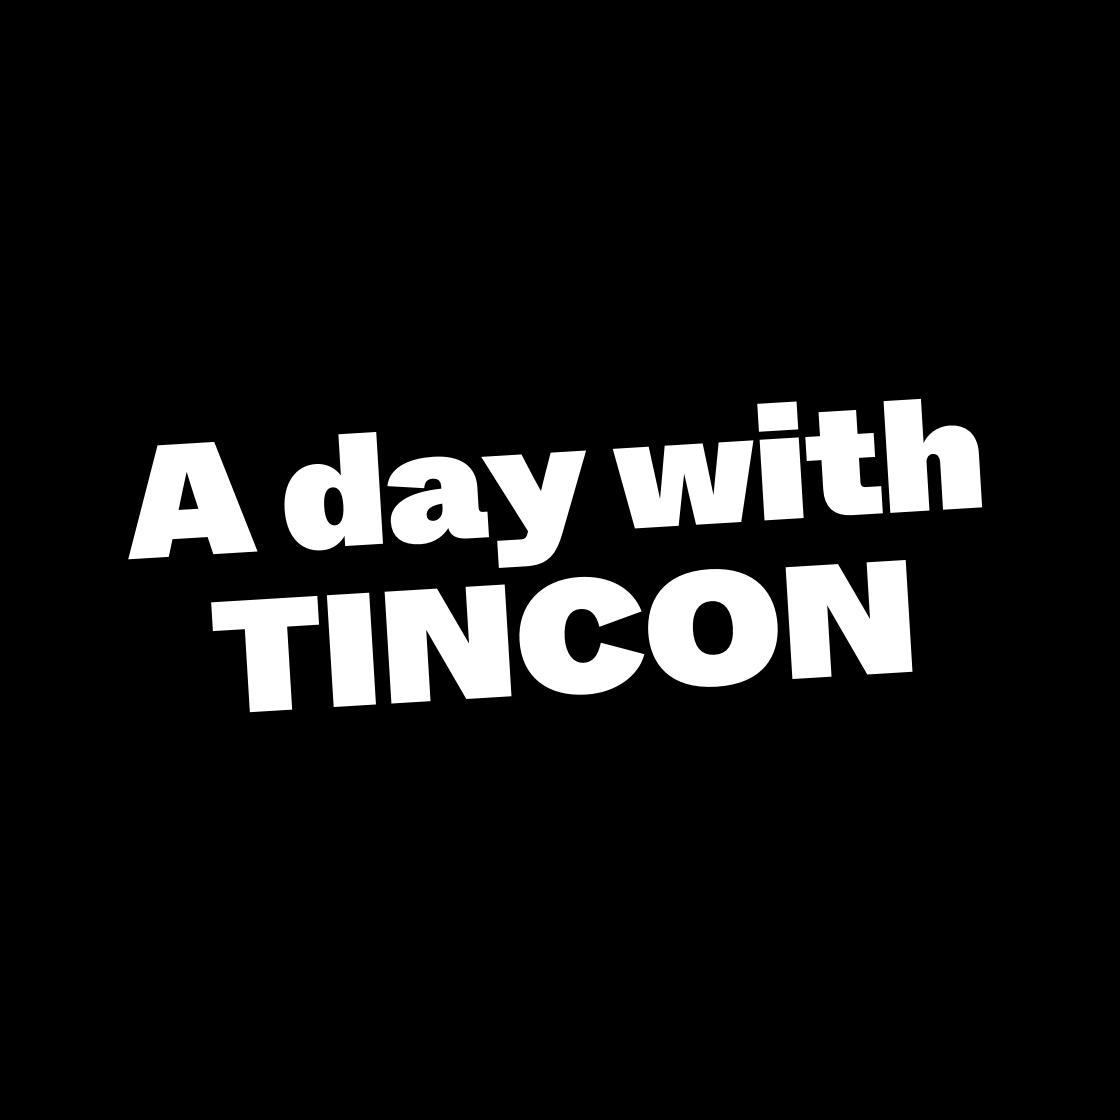 A day with TINCON